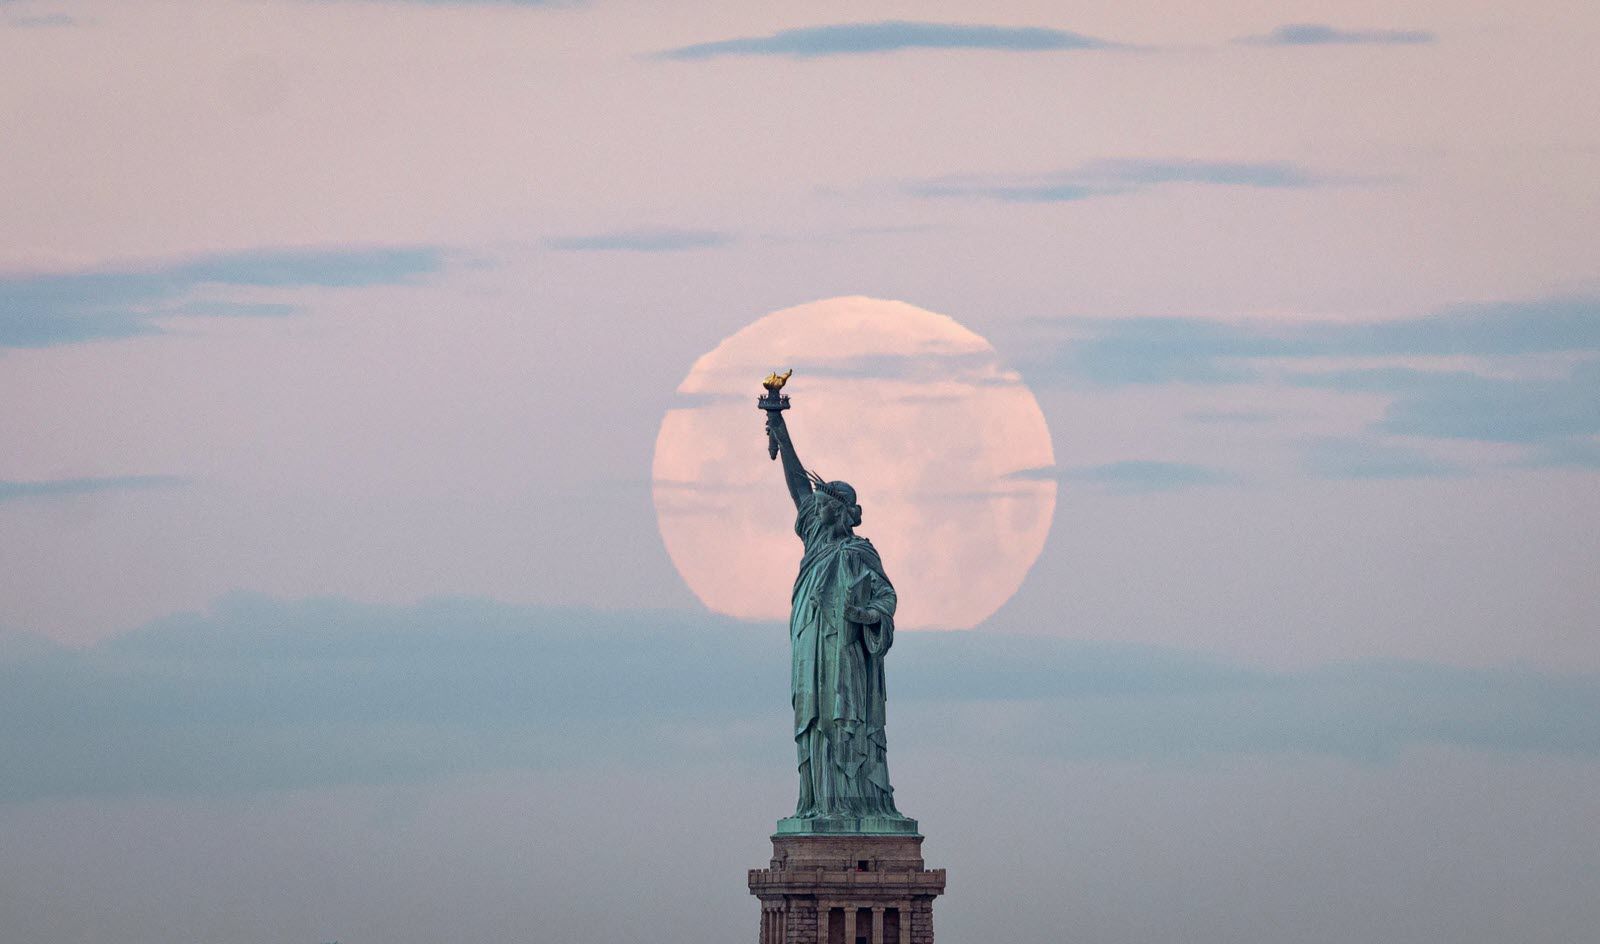 Even If You Don’t Know Much About Geography, Play This World Landmarks Quiz Anyway Statue Of Liberty, New York City, USA, Moon, Moon